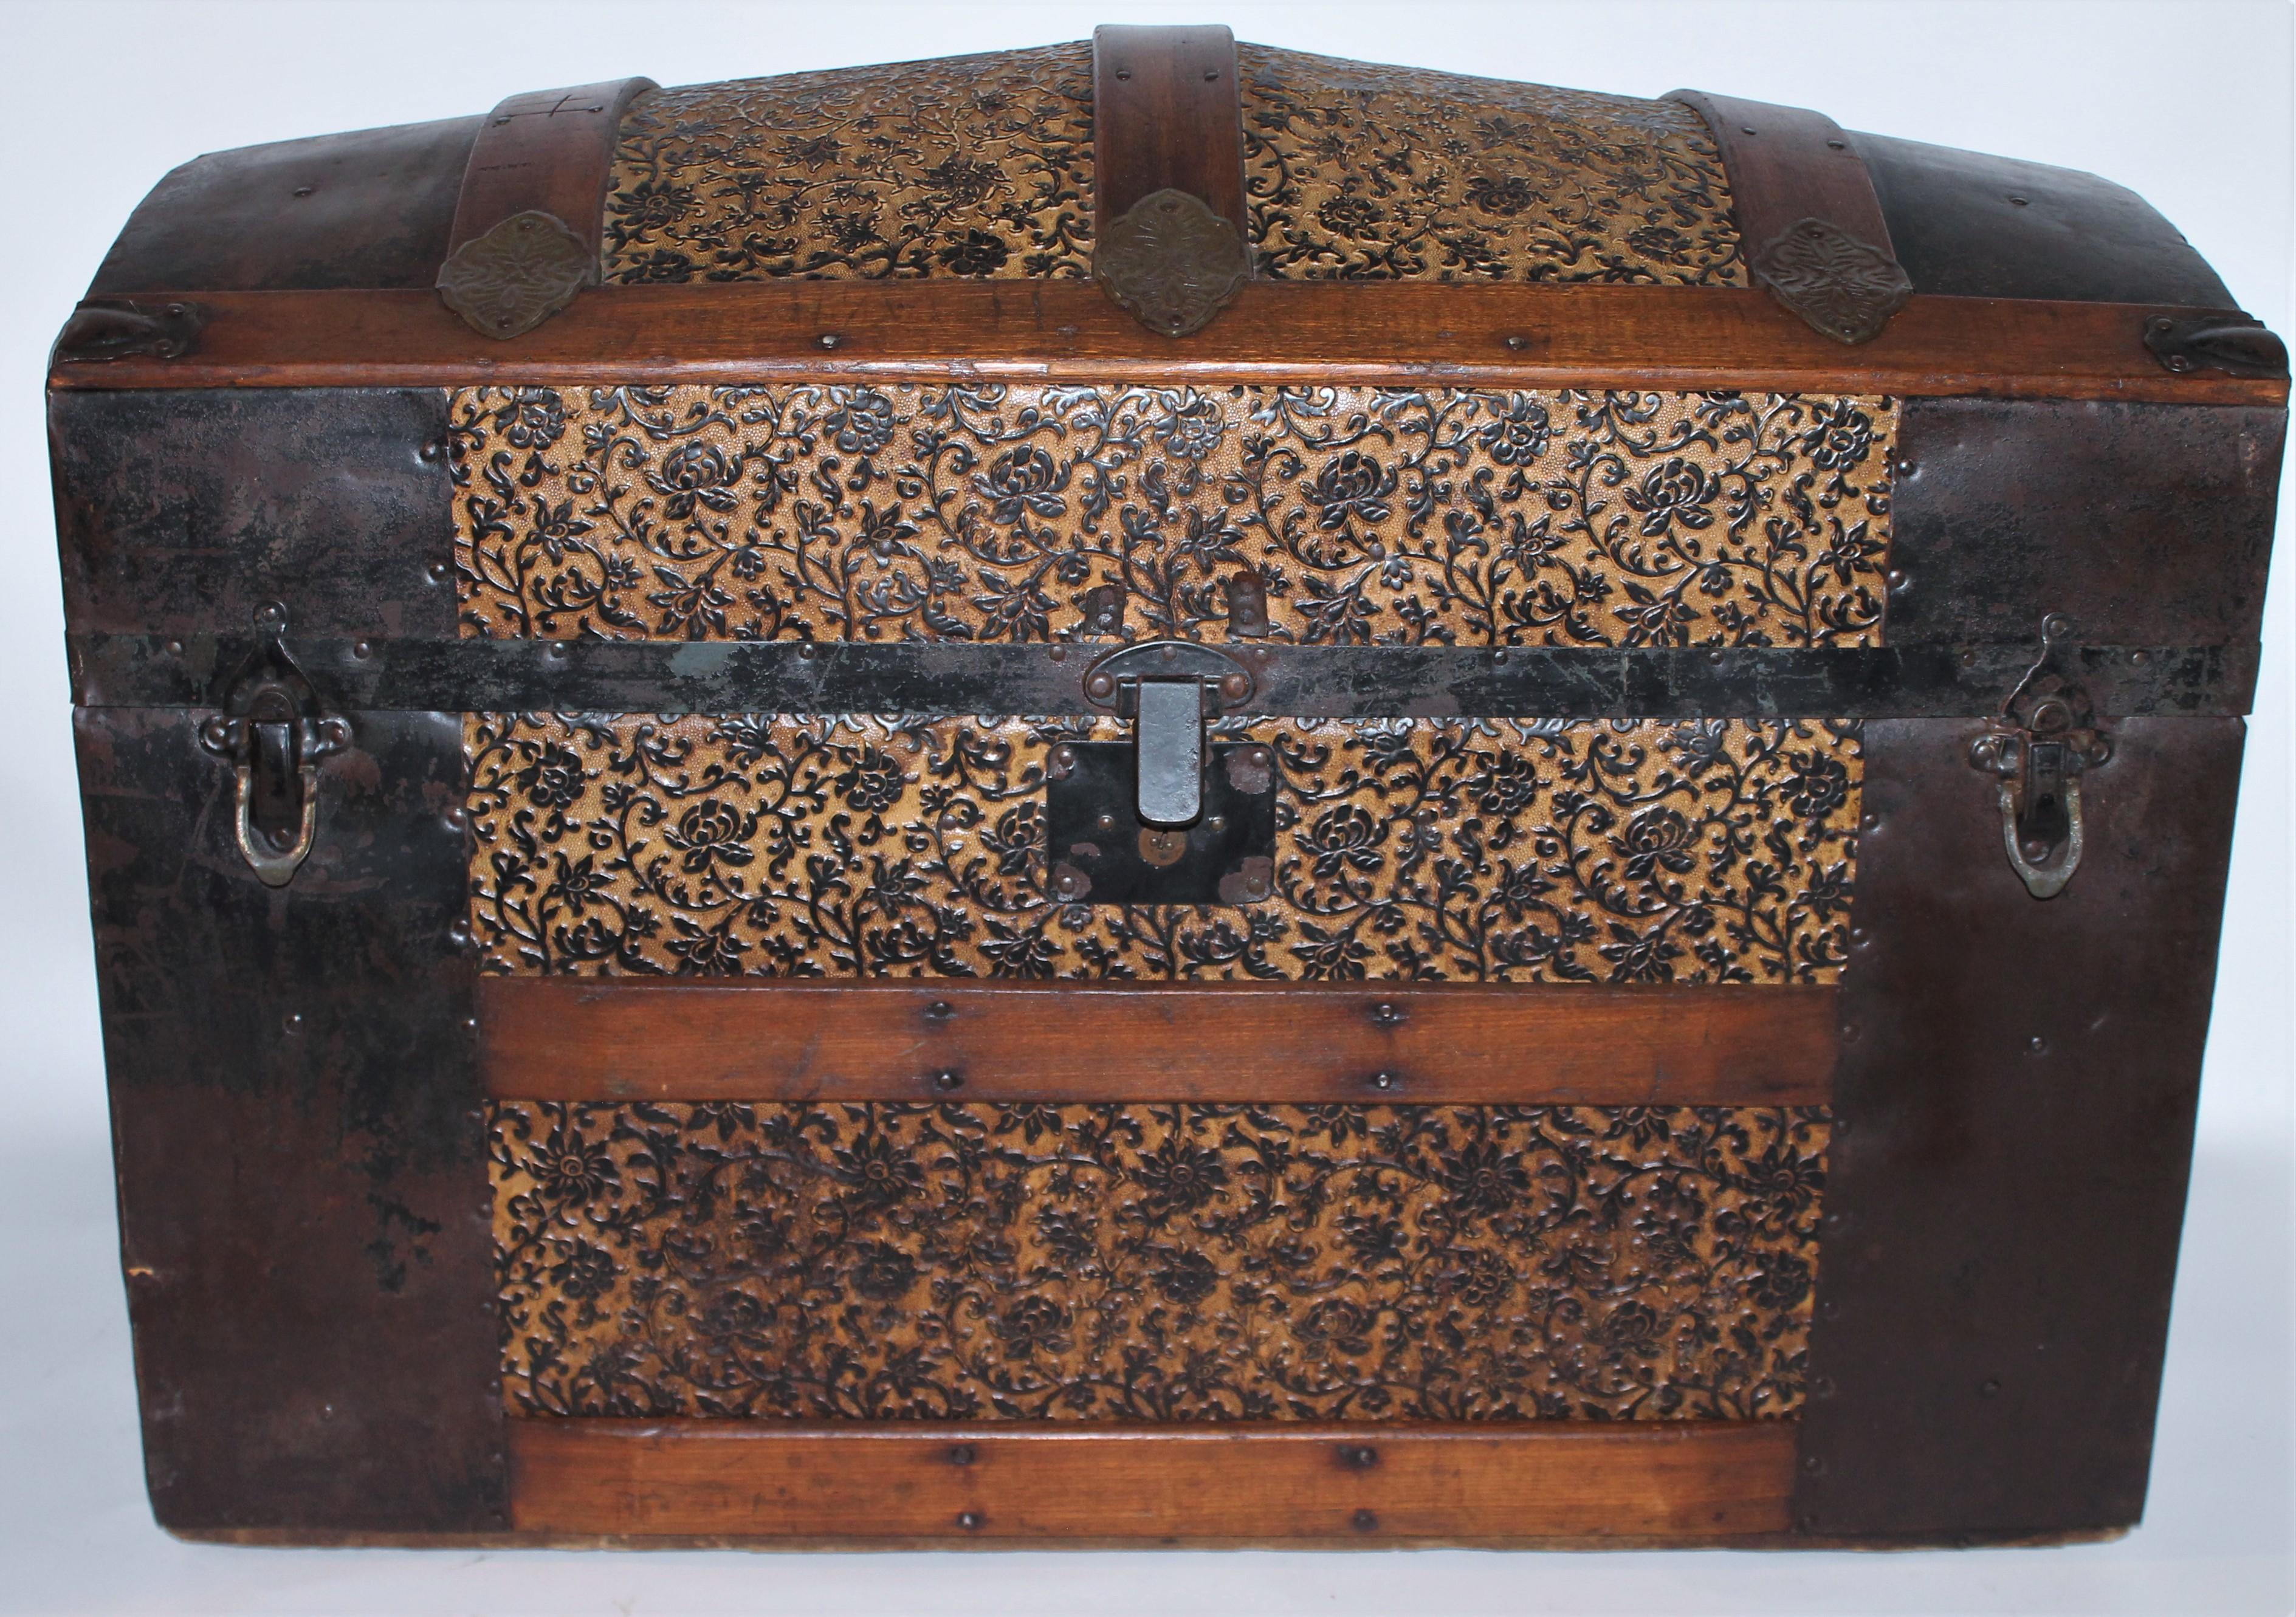 This 19th century camel back trunk or dome top trunk in fine distressed condition. The pressed tin has an original mustard painted surface. The only negative thing is the original leather handles are missing. Easy to replace with a leather belt or